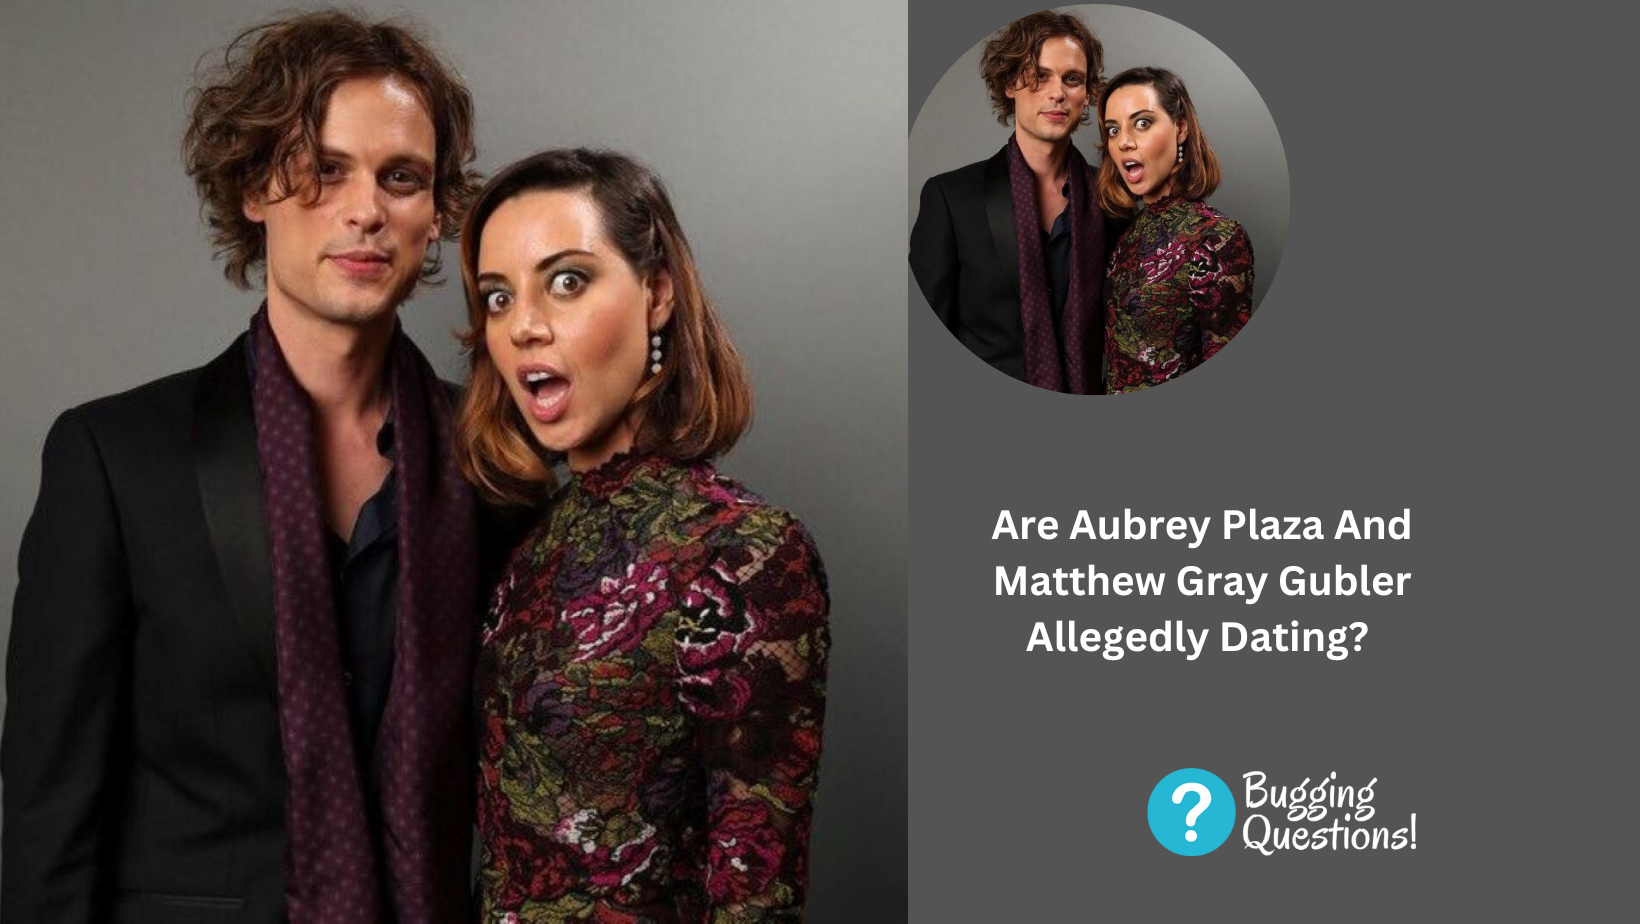 Are Aubrey Plaza And Matthew Gray Gubler Allegedly Dating? Know More About Their Relationship Status